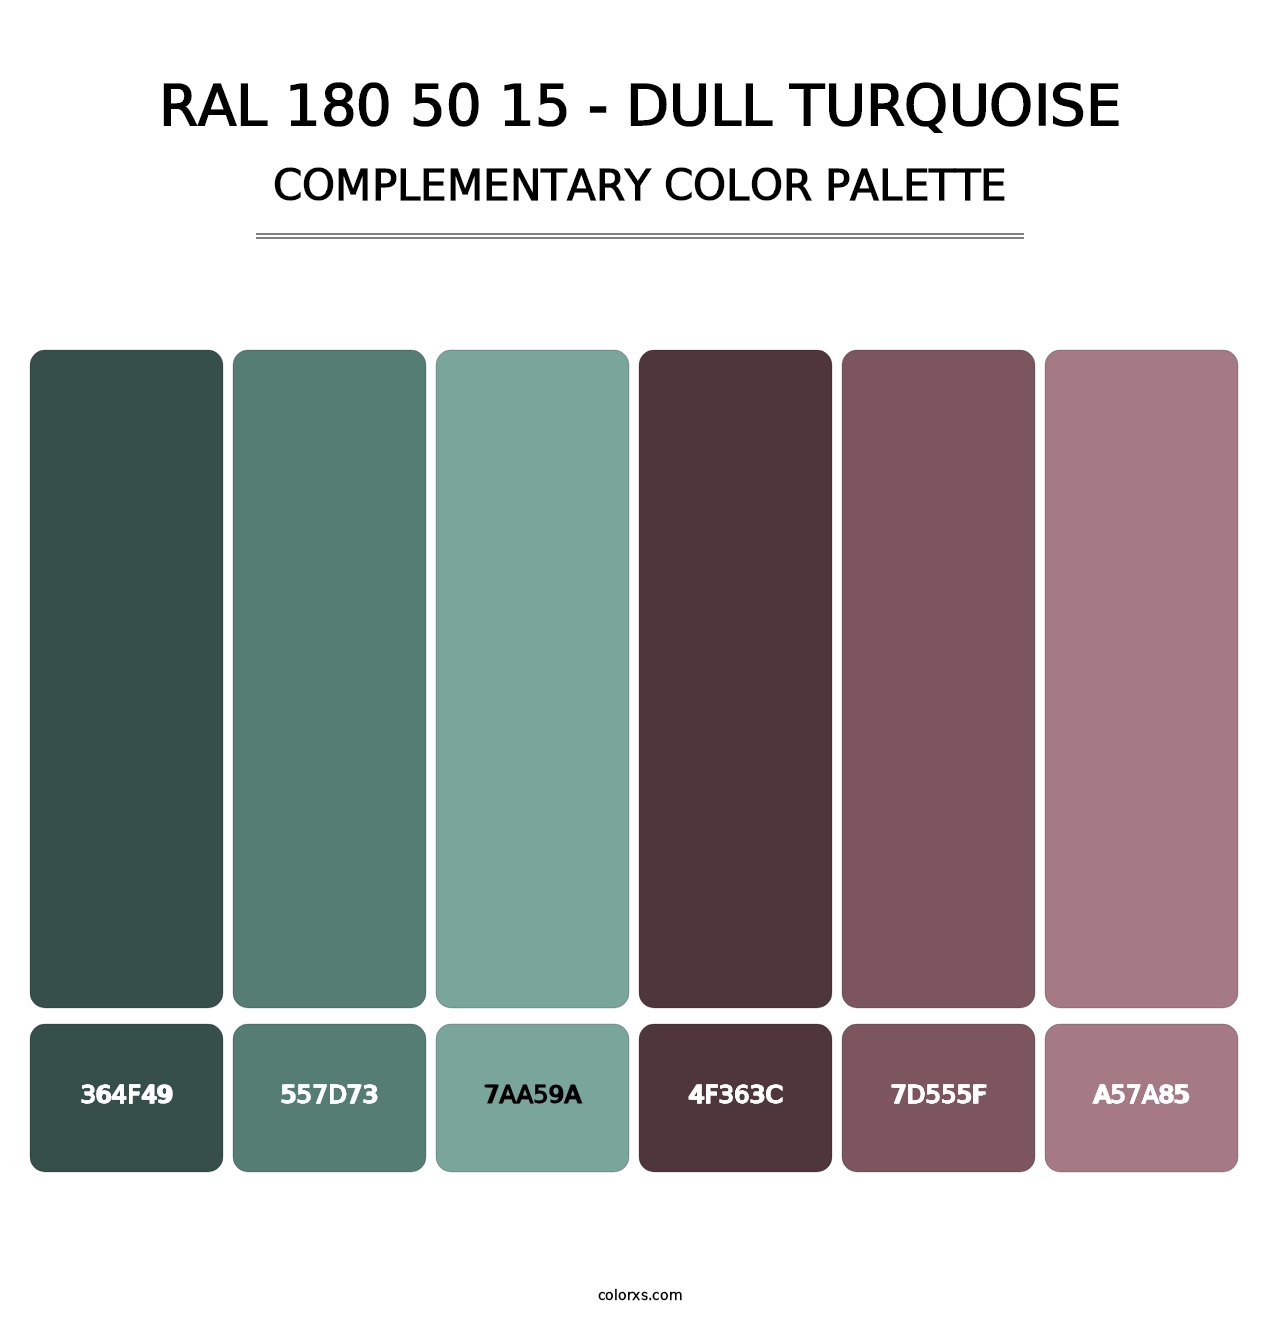 RAL 180 50 15 - Dull Turquoise - Complementary Color Palette